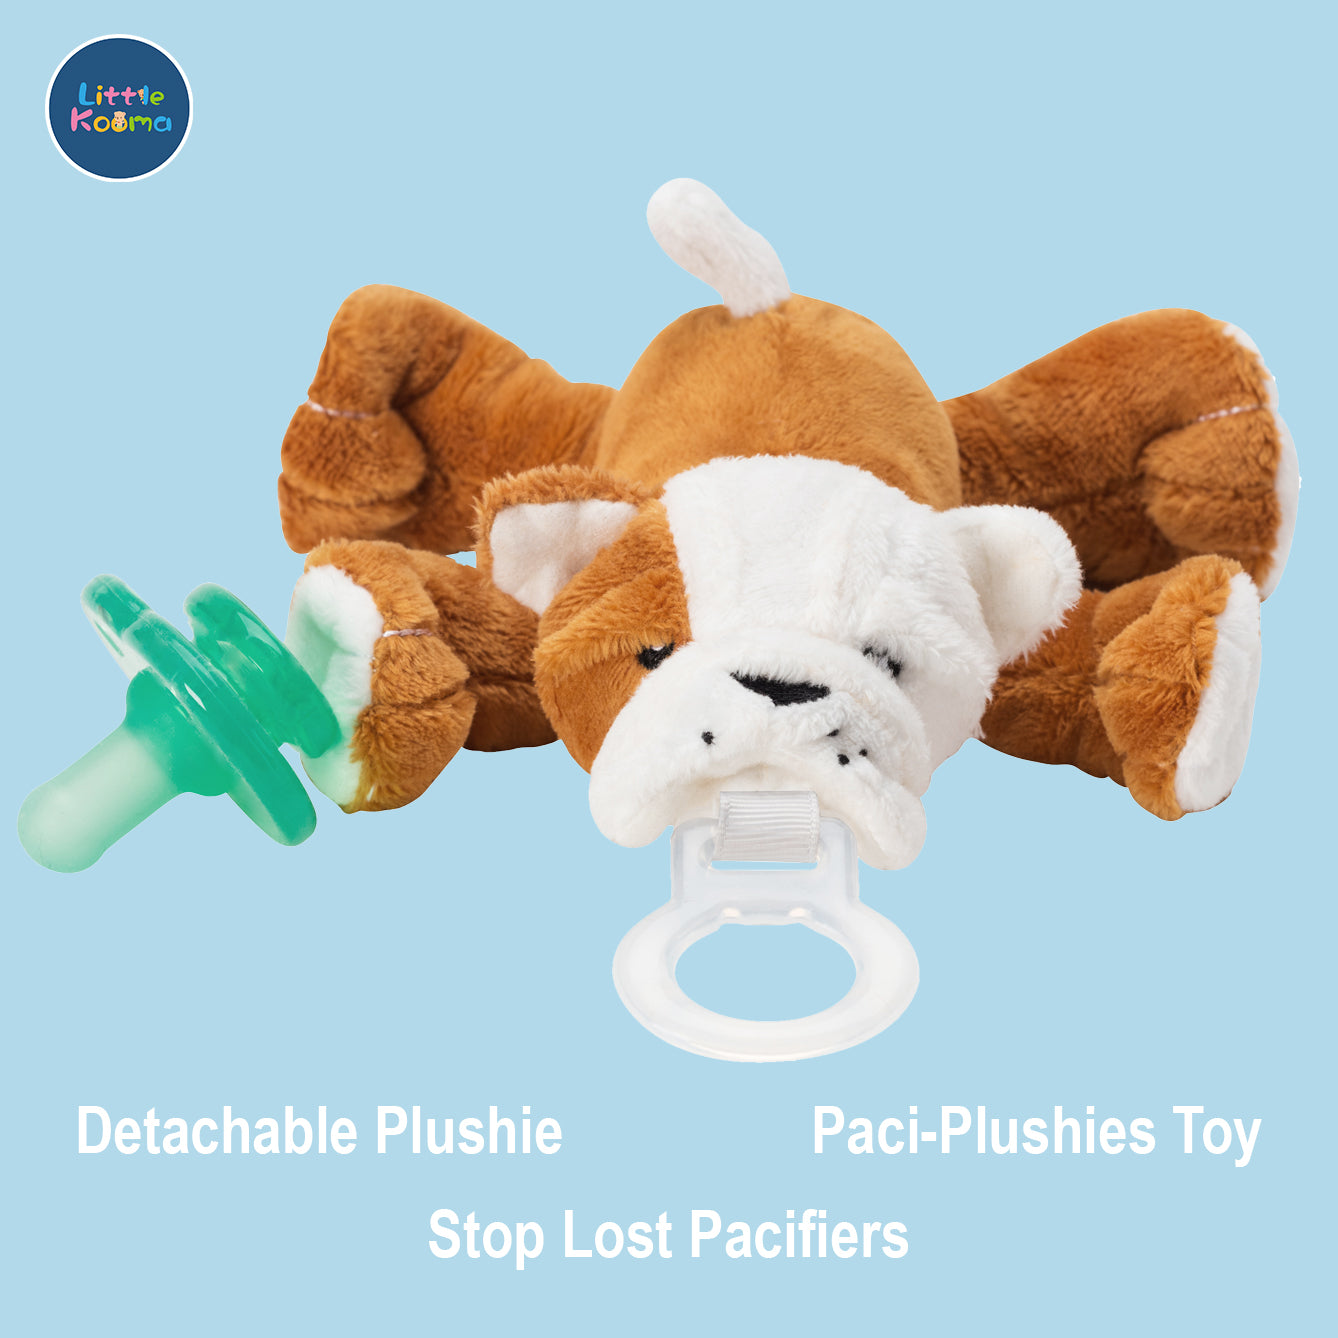 Nookums Paci-Plushies Shakies - Bull Dog Pacifier Holder - Plush Toy Includes Detachable Pacifier - Little Kooma